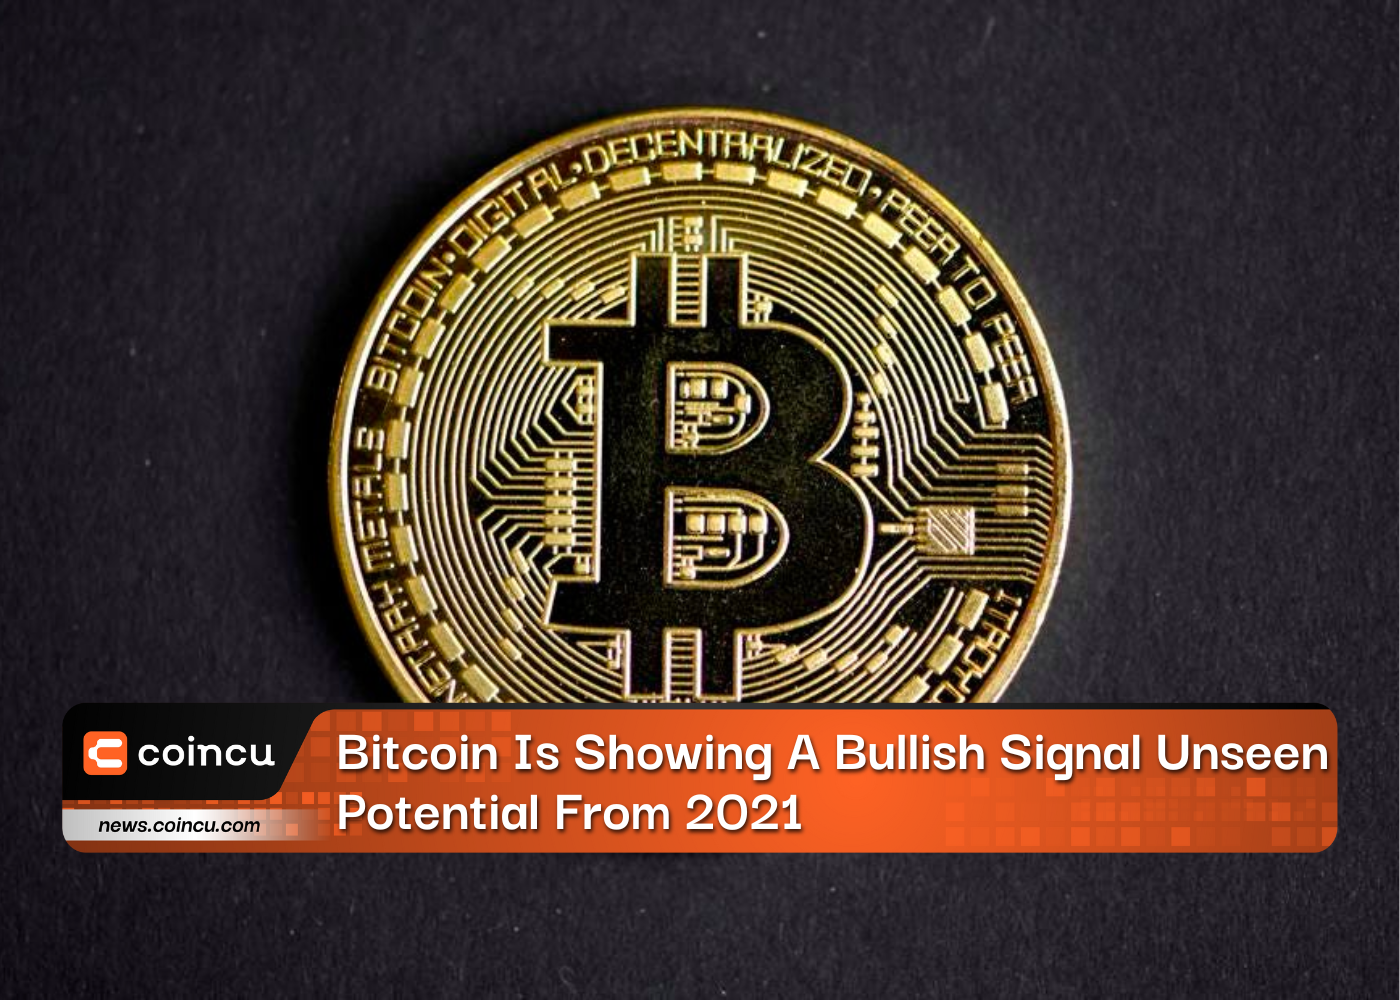 Bitcoin Is Showing A Bullish Signal Unseen Potential From 2021